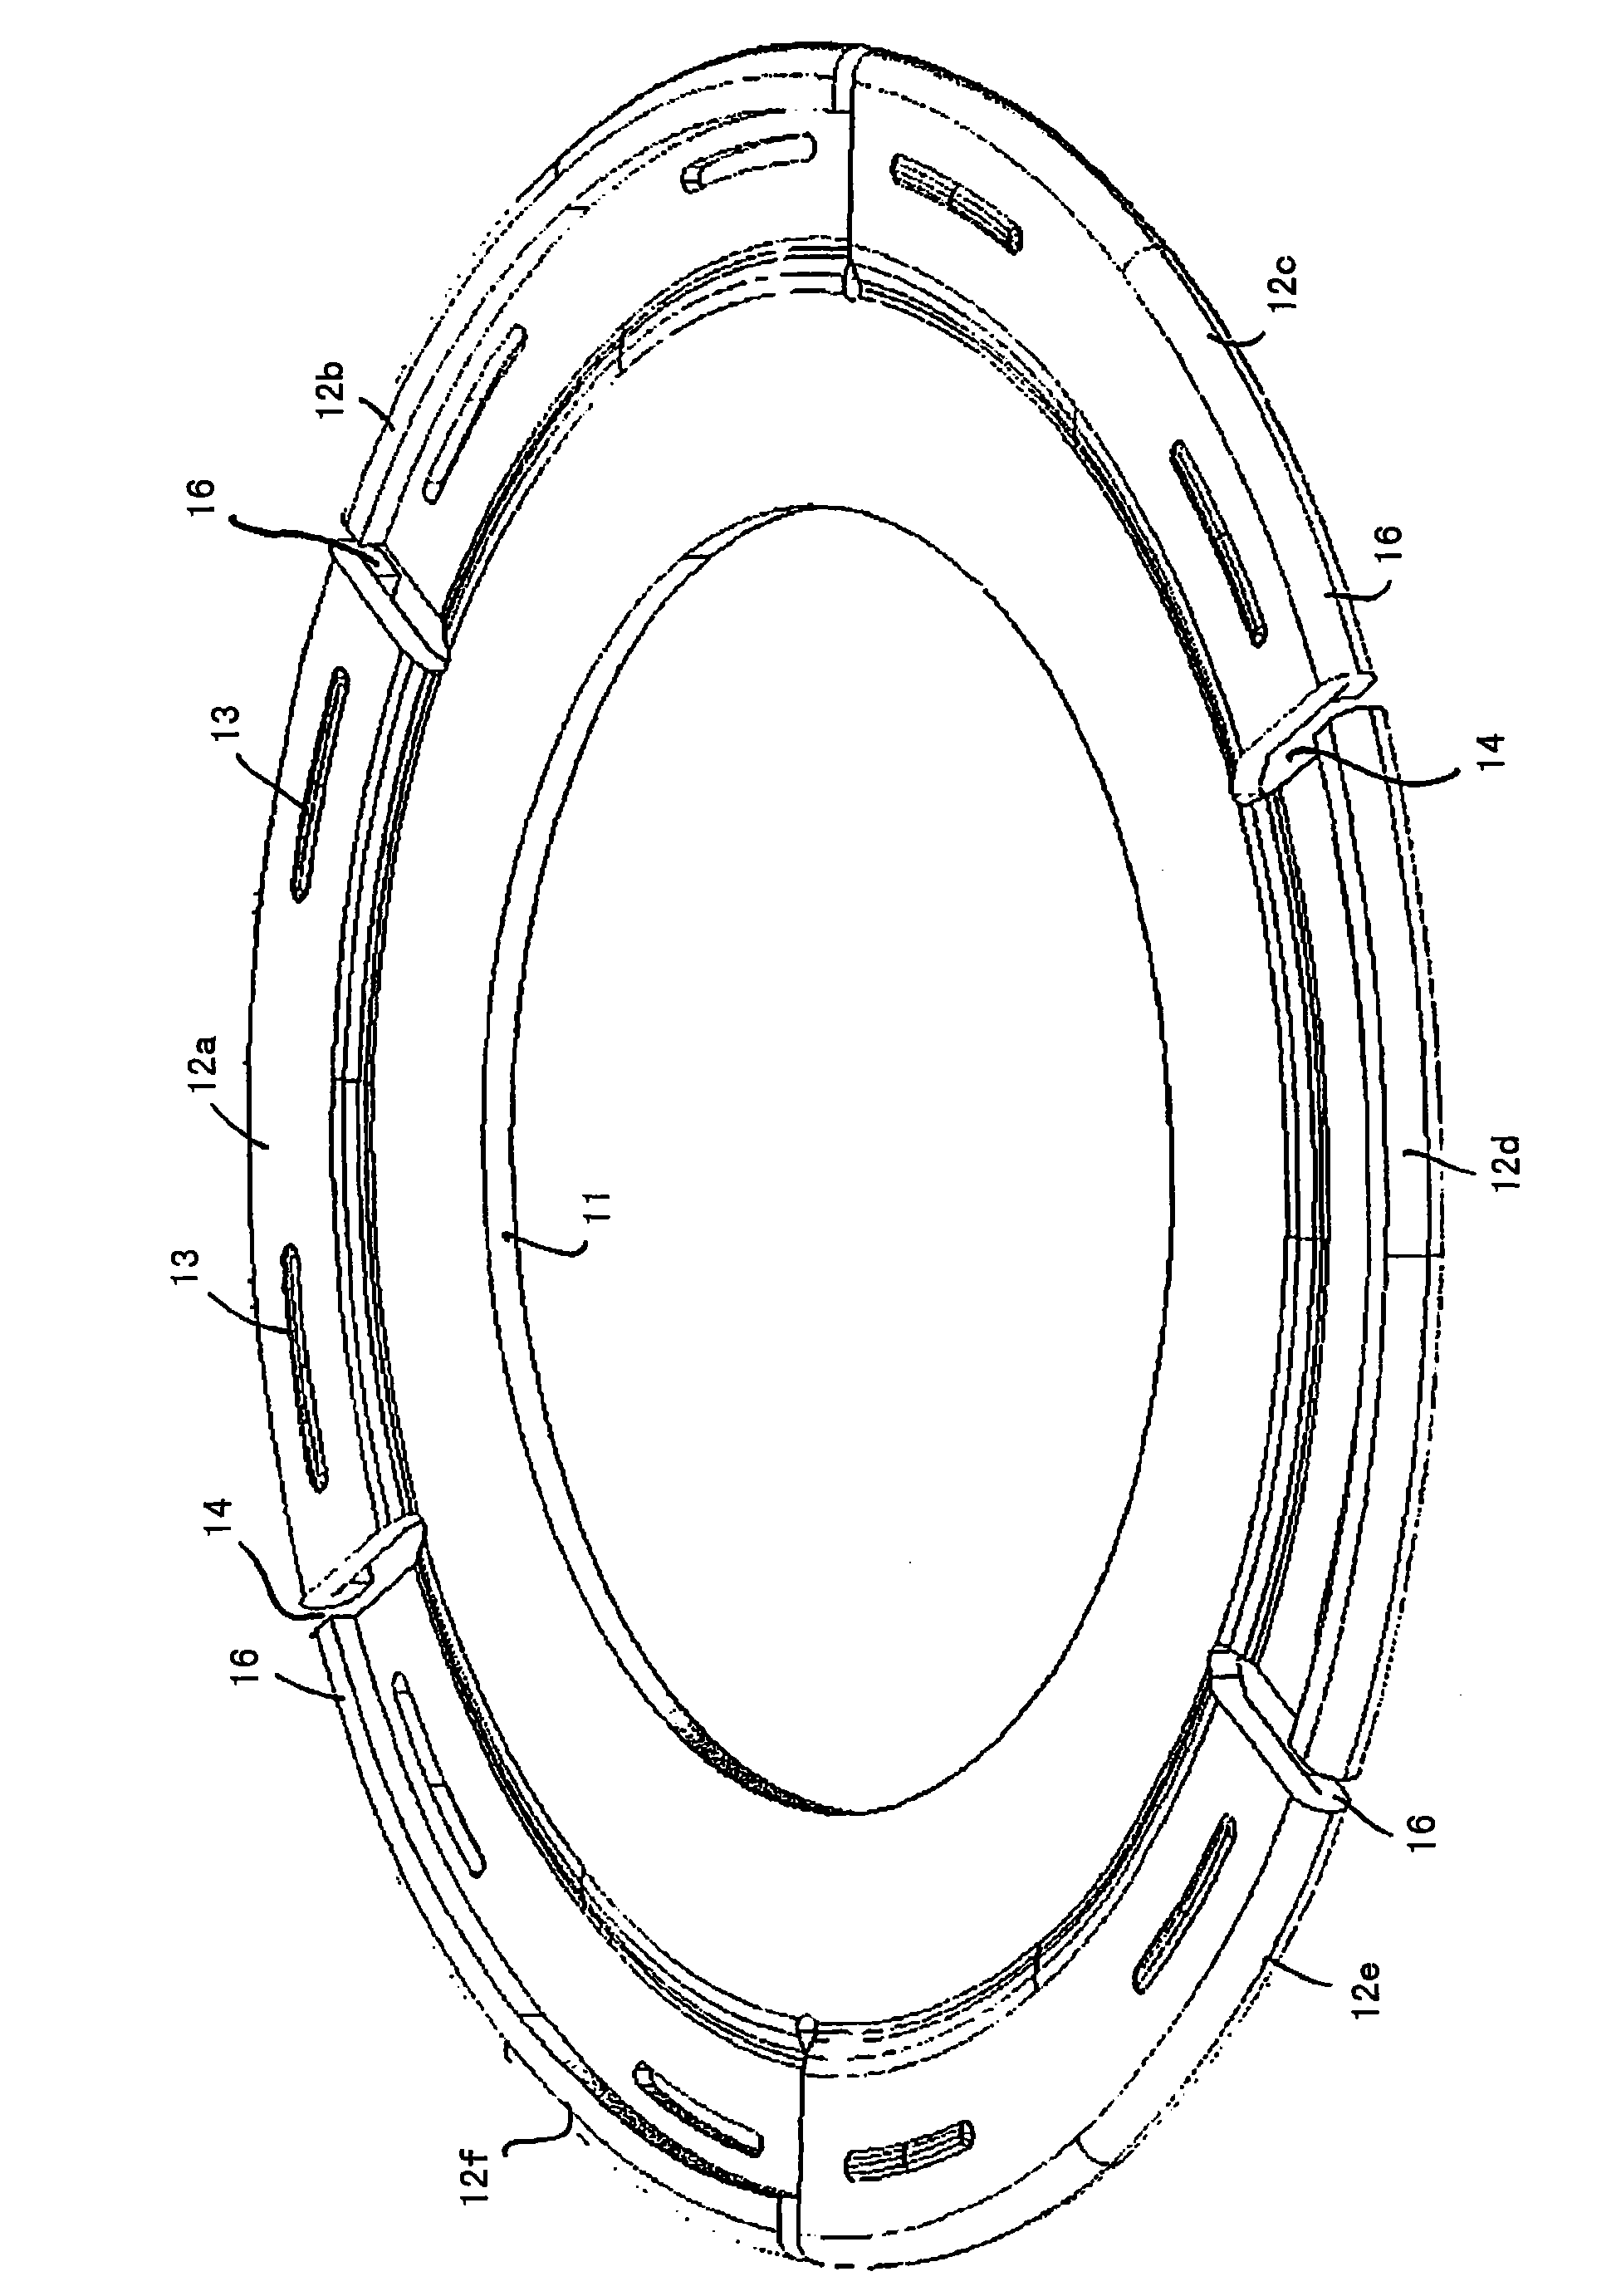 Support member used for clutch apparatus having two friction clutches